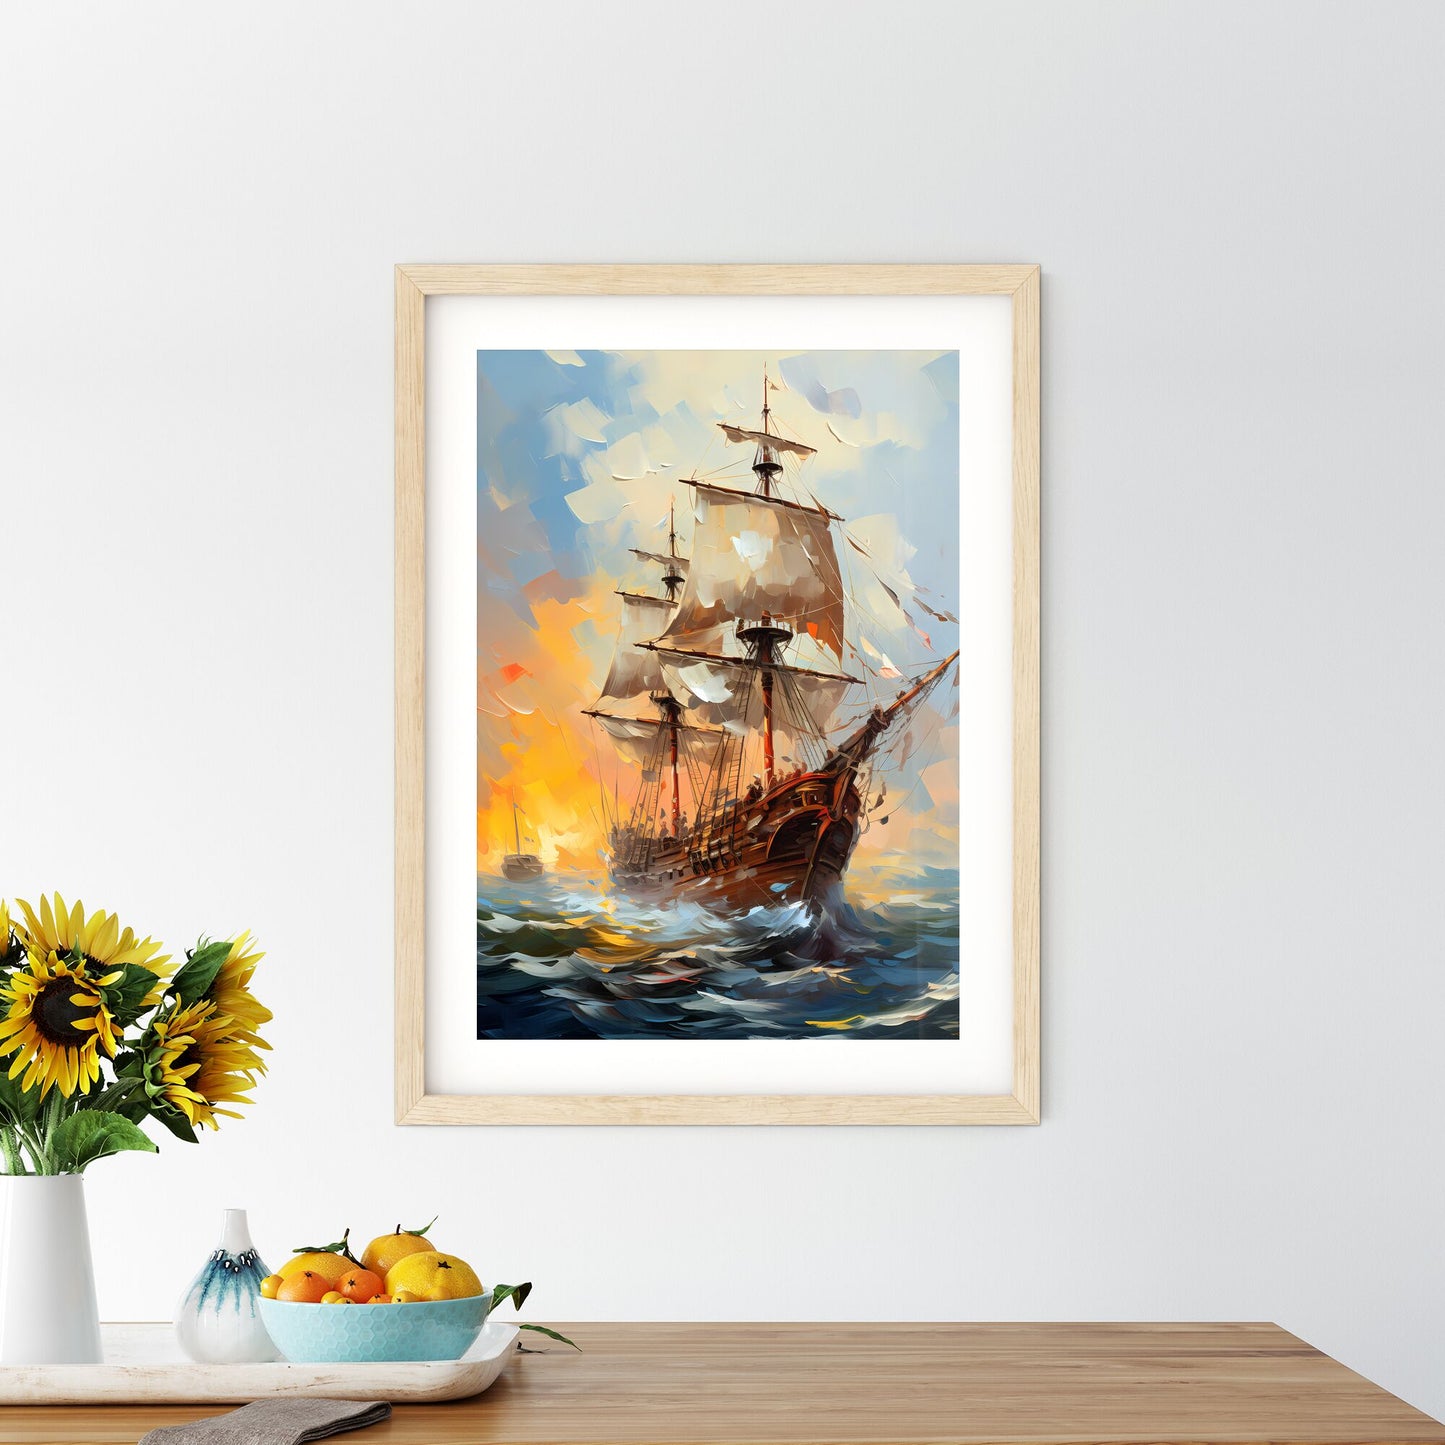 Santa Maria Nina And Pinta Of Christopher Columbus - A Painting Of A Ship In The Ocean With Golden Hind In The Background Default Title